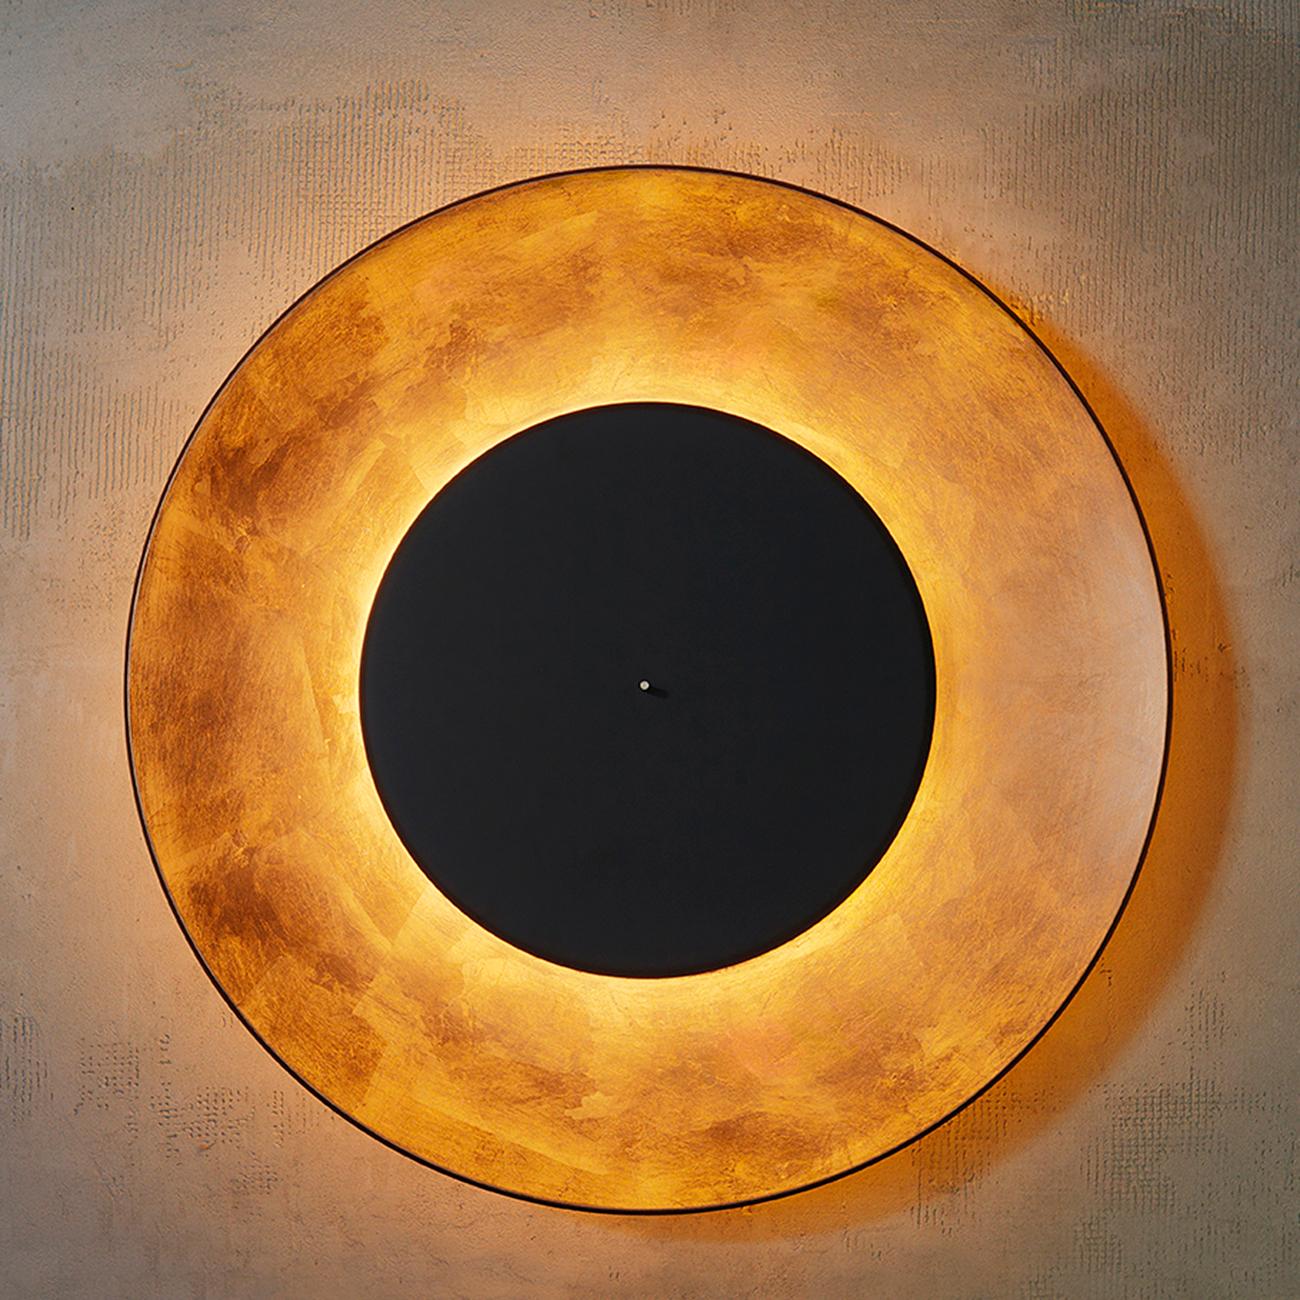 Wall lamp moon with black finish metal structure
and front disc. With a removable front disc to up the light
into the opalitte. Inside in gold leaf. Price: 3400,00€.
Lighting: Ring LED 28,6W (3000K, CRI>80, 3650Lm),
Ring LED not included.
Also